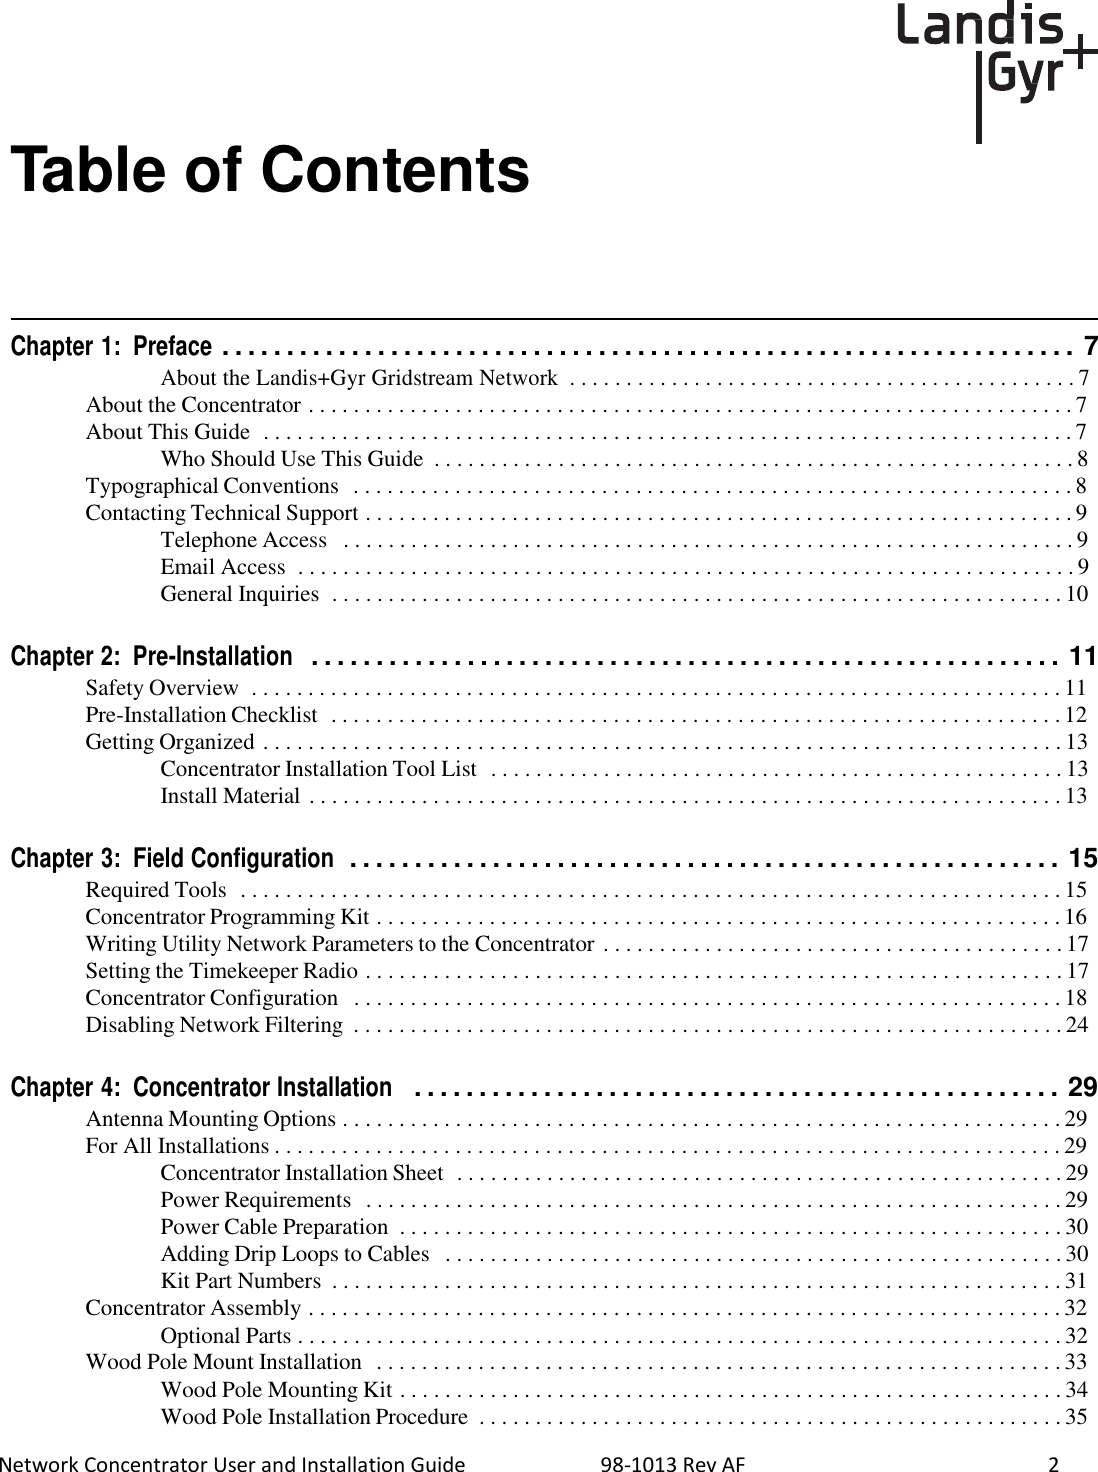  Network Concentrator User and Installation Guide                          98-1013 Rev AF    2     Table of Contents       Chapter 1:  Preface . . . . . . . . . . . . . . . . . . . . . . . . . . . . . . . . . . . . . . . . . . . . . . . . . . . . . . . . . . . . . . . . . . 7 About the Landis+Gyr Gridstream Network  . . . . . . . . . . . . . . . . . . . . . . . . . . . . . . . . . . . . . . . . . . . . . 7  About the Concentrator . . . . . . . . . . . . . . . . . . . . . . . . . . . . . . . . . . . . . . . . . . . . . . . . . . . . . . . . . . . . . . . . . . . . 7 About This Guide  . . . . . . . . . . . . . . . . . . . . . . . . . . . . . . . . . . . . . . . . . . . . . . . . . . . . . . . . . . . . . . . . . . . . . . . . 7 Who Should Use This Guide  . . . . . . . . . . . . . . . . . . . . . . . . . . . . . . . . . . . . . . . . . . . . . . . . . . . . . . . . . 8 Typographical Conventions  . . . . . . . . . . . . . . . . . . . . . . . . . . . . . . . . . . . . . . . . . . . . . . . . . . . . . . . . . . . . . . . . 8 Contacting Technical Support . . . . . . . . . . . . . . . . . . . . . . . . . . . . . . . . . . . . . . . . . . . . . . . . . . . . . . . . . . . . . . . 9 Telephone Access   . . . . . . . . . . . . . . . . . . . . . . . . . . . . . . . . . . . . . . . . . . . . . . . . . . . . . . . . . . . . . . . . . 9 Email Access  . . . . . . . . . . . . . . . . . . . . . . . . . . . . . . . . . . . . . . . . . . . . . . . . . . . . . . . . . . . . . . . . . . . . . 9 General Inquiries  . . . . . . . . . . . . . . . . . . . . . . . . . . . . . . . . . . . . . . . . . . . . . . . . . . . . . . . . . . . . . . . . . 10   Chapter 2:  Pre-Installation  . . . . . . . . . . . . . . . . . . . . . . . . . . . . . . . . . . . . . . . . . . . . . . . . . . . . . . . . . . 11 Safety Overview  . . . . . . . . . . . . . . . . . . . . . . . . . . . . . . . . . . . . . . . . . . . . . . . . . . . . . . . . . . . . . . . . . . . . . . . . 11 Pre-Installation Checklist  . . . . . . . . . . . . . . . . . . . . . . . . . . . . . . . . . . . . . . . . . . . . . . . . . . . . . . . . . . . . . . . . . 12 Getting Organized . . . . . . . . . . . . . . . . . . . . . . . . . . . . . . . . . . . . . . . . . . . . . . . . . . . . . . . . . . . . . . . . . . . . . . . 13 Concentrator Installation Tool List  . . . . . . . . . . . . . . . . . . . . . . . . . . . . . . . . . . . . . . . . . . . . . . . . . . . 13 Install Material . . . . . . . . . . . . . . . . . . . . . . . . . . . . . . . . . . . . . . . . . . . . . . . . . . . . . . . . . . . . . . . . . . . 13   Chapter 3:  Field Configuration  . . . . . . . . . . . . . . . . . . . . . . . . . . . . . . . . . . . . . . . . . . . . . . . . . . . . . . . 15 Required Tools  . . . . . . . . . . . . . . . . . . . . . . . . . . . . . . . . . . . . . . . . . . . . . . . . . . . . . . . . . . . . . . . . . . . . . . . . . 15 Concentrator Programming Kit . . . . . . . . . . . . . . . . . . . . . . . . . . . . . . . . . . . . . . . . . . . . . . . . . . . . . . . . . . . . . 16 Writing Utility Network Parameters to the Concentrator . . . . . . . . . . . . . . . . . . . . . . . . . . . . . . . . . . . . . . . . . 17 Setting the Timekeeper Radio . . . . . . . . . . . . . . . . . . . . . . . . . . . . . . . . . . . . . . . . . . . . . . . . . . . . . . . . . . . . . . 17 Concentrator Configuration   . . . . . . . . . . . . . . . . . . . . . . . . . . . . . . . . . . . . . . . . . . . . . . . . . . . . . . . . . . . . . . . 18 Disabling Network Filtering  . . . . . . . . . . . . . . . . . . . . . . . . . . . . . . . . . . . . . . . . . . . . . . . . . . . . . . . . . . . . . . . 24   Chapter 4:  Concentrator Installation   . . . . . . . . . . . . . . . . . . . . . . . . . . . . . . . . . . . . . . . . . . . . . . . . . . 29 Antenna Mounting Options . . . . . . . . . . . . . . . . . . . . . . . . . . . . . . . . . . . . . . . . . . . . . . . . . . . . . . . . . . . . . . . . 29 For All Installations . . . . . . . . . . . . . . . . . . . . . . . . . . . . . . . . . . . . . . . . . . . . . . . . . . . . . . . . . . . . . . . . . . . . . . 29 Concentrator Installation Sheet  . . . . . . . . . . . . . . . . . . . . . . . . . . . . . . . . . . . . . . . . . . . . . . . . . . . . . . 29 Power Requirements  . . . . . . . . . . . . . . . . . . . . . . . . . . . . . . . . . . . . . . . . . . . . . . . . . . . . . . . . . . . . . . 29 Power Cable Preparation  . . . . . . . . . . . . . . . . . . . . . . . . . . . . . . . . . . . . . . . . . . . . . . . . . . . . . . . . . . . 30 Adding Drip Loops to Cables   . . . . . . . . . . . . . . . . . . . . . . . . . . . . . . . . . . . . . . . . . . . . . . . . . . . . . . . 30 Kit Part Numbers  . . . . . . . . . . . . . . . . . . . . . . . . . . . . . . . . . . . . . . . . . . . . . . . . . . . . . . . . . . . . . . . . . 31 Concentrator Assembly . . . . . . . . . . . . . . . . . . . . . . . . . . . . . . . . . . . . . . . . . . . . . . . . . . . . . . . . . . . . . . . . . . . 32 Optional Parts . . . . . . . . . . . . . . . . . . . . . . . . . . . . . . . . . . . . . . . . . . . . . . . . . . . . . . . . . . . . . . . . . . . . 32 Wood Pole Mount Installation  . . . . . . . . . . . . . . . . . . . . . . . . . . . . . . . . . . . . . . . . . . . . . . . . . . . . . . . . . . . . . 33 Wood Pole Mounting Kit . . . . . . . . . . . . . . . . . . . . . . . . . . . . . . . . . . . . . . . . . . . . . . . . . . . . . . . . . . . 34 Wood Pole Installation Procedure  . . . . . . . . . . . . . . . . . . . . . . . . . . . . . . . . . . . . . . . . . . . . . . . . . . . . 35 